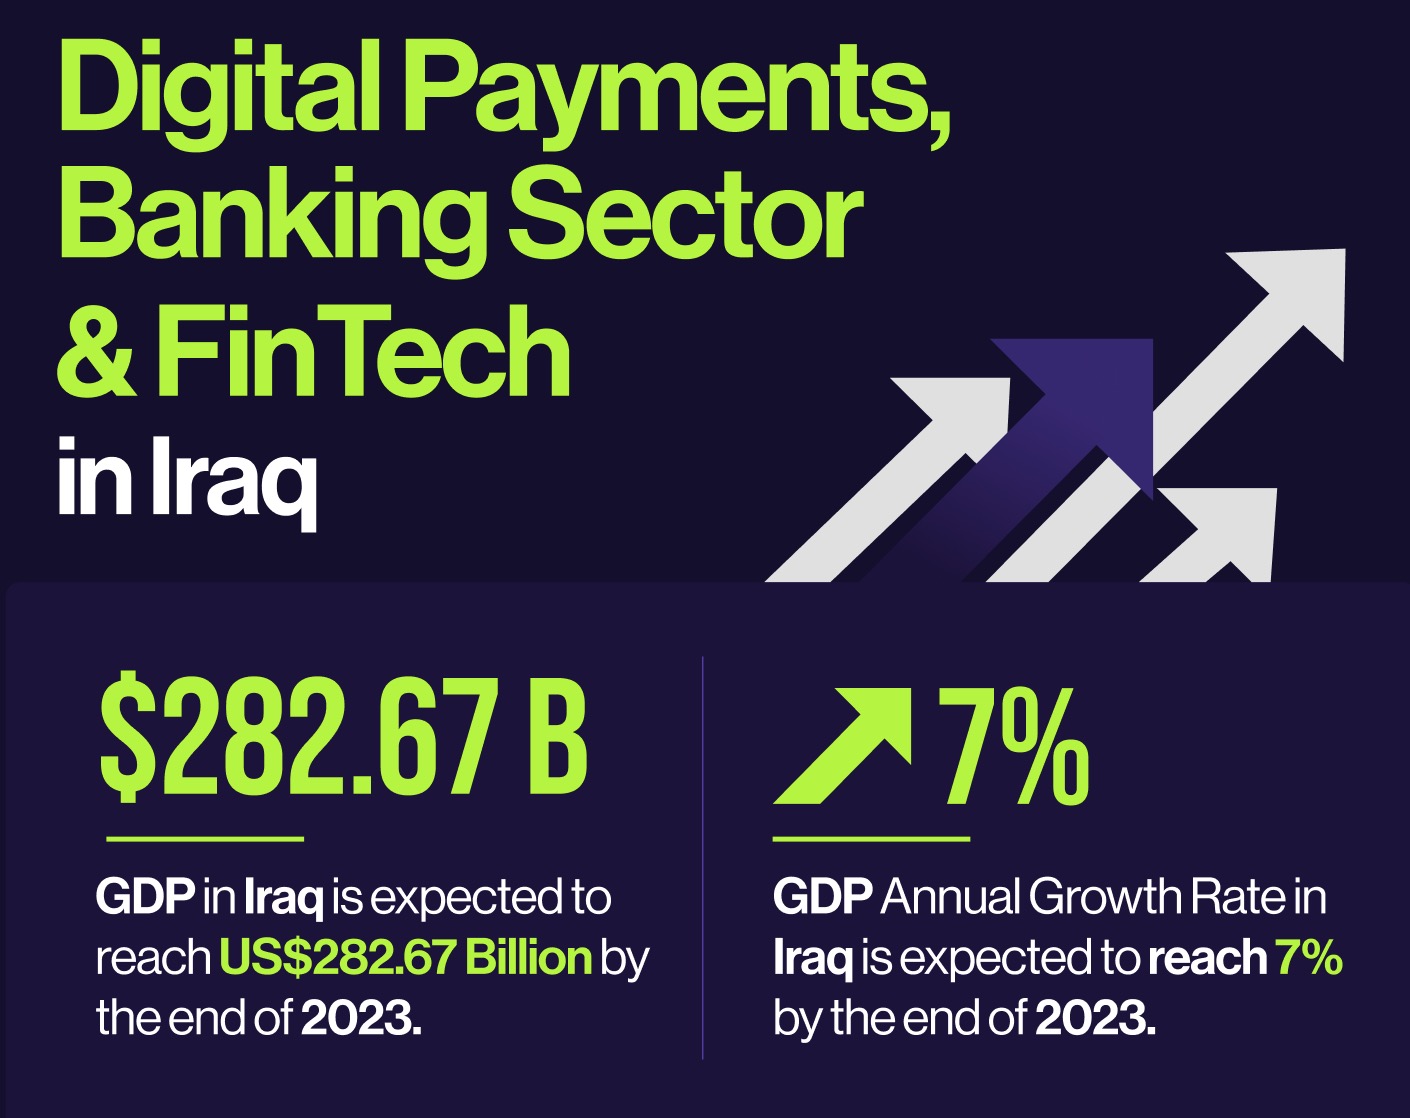 Digital Payments, Banking Sector & FinTech in Iraq